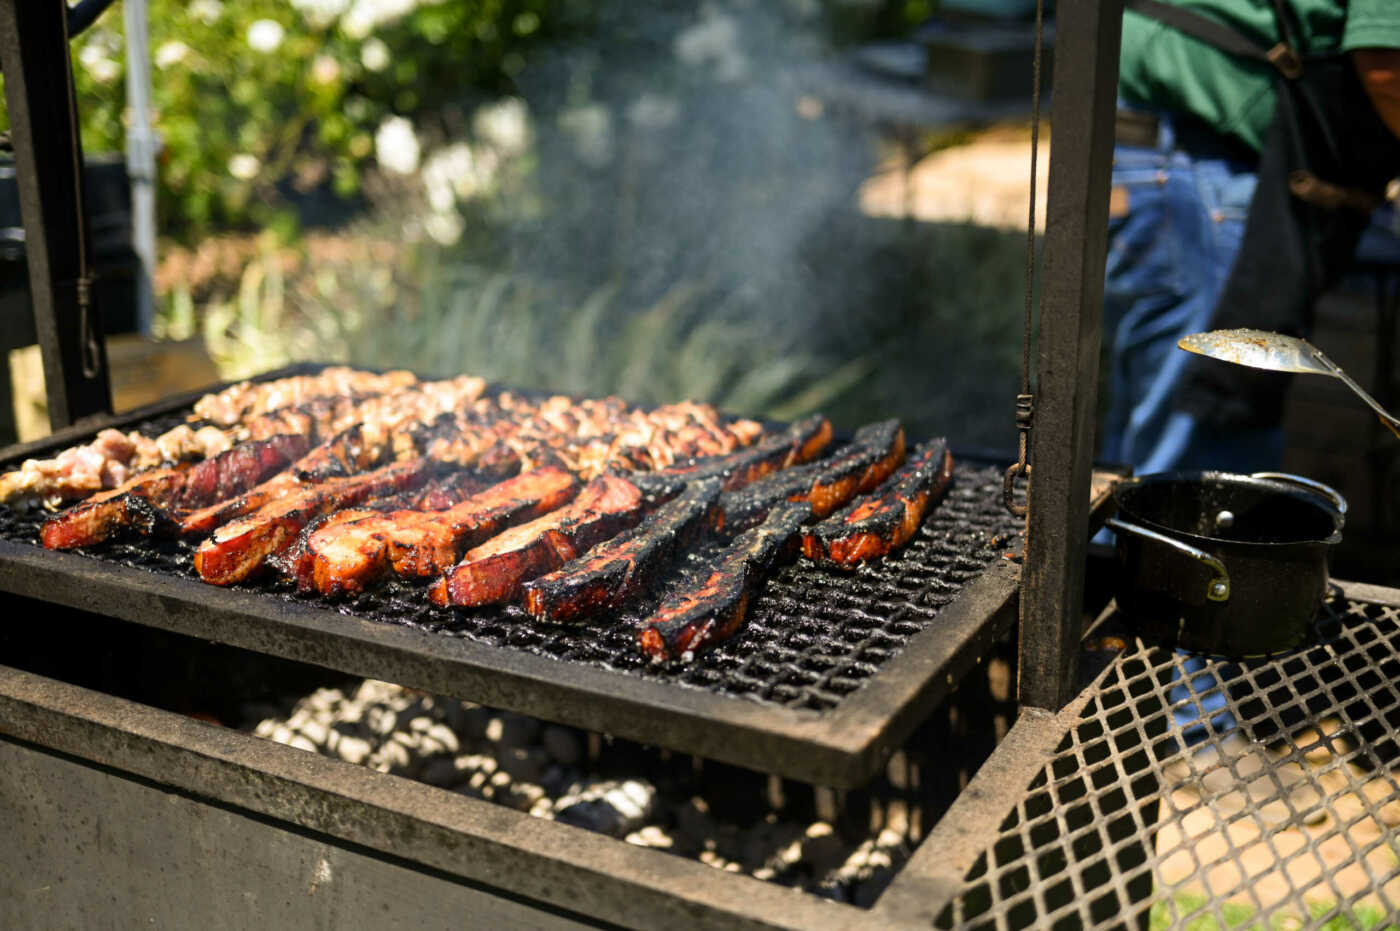 Bbq ribs being cooked on a grill.